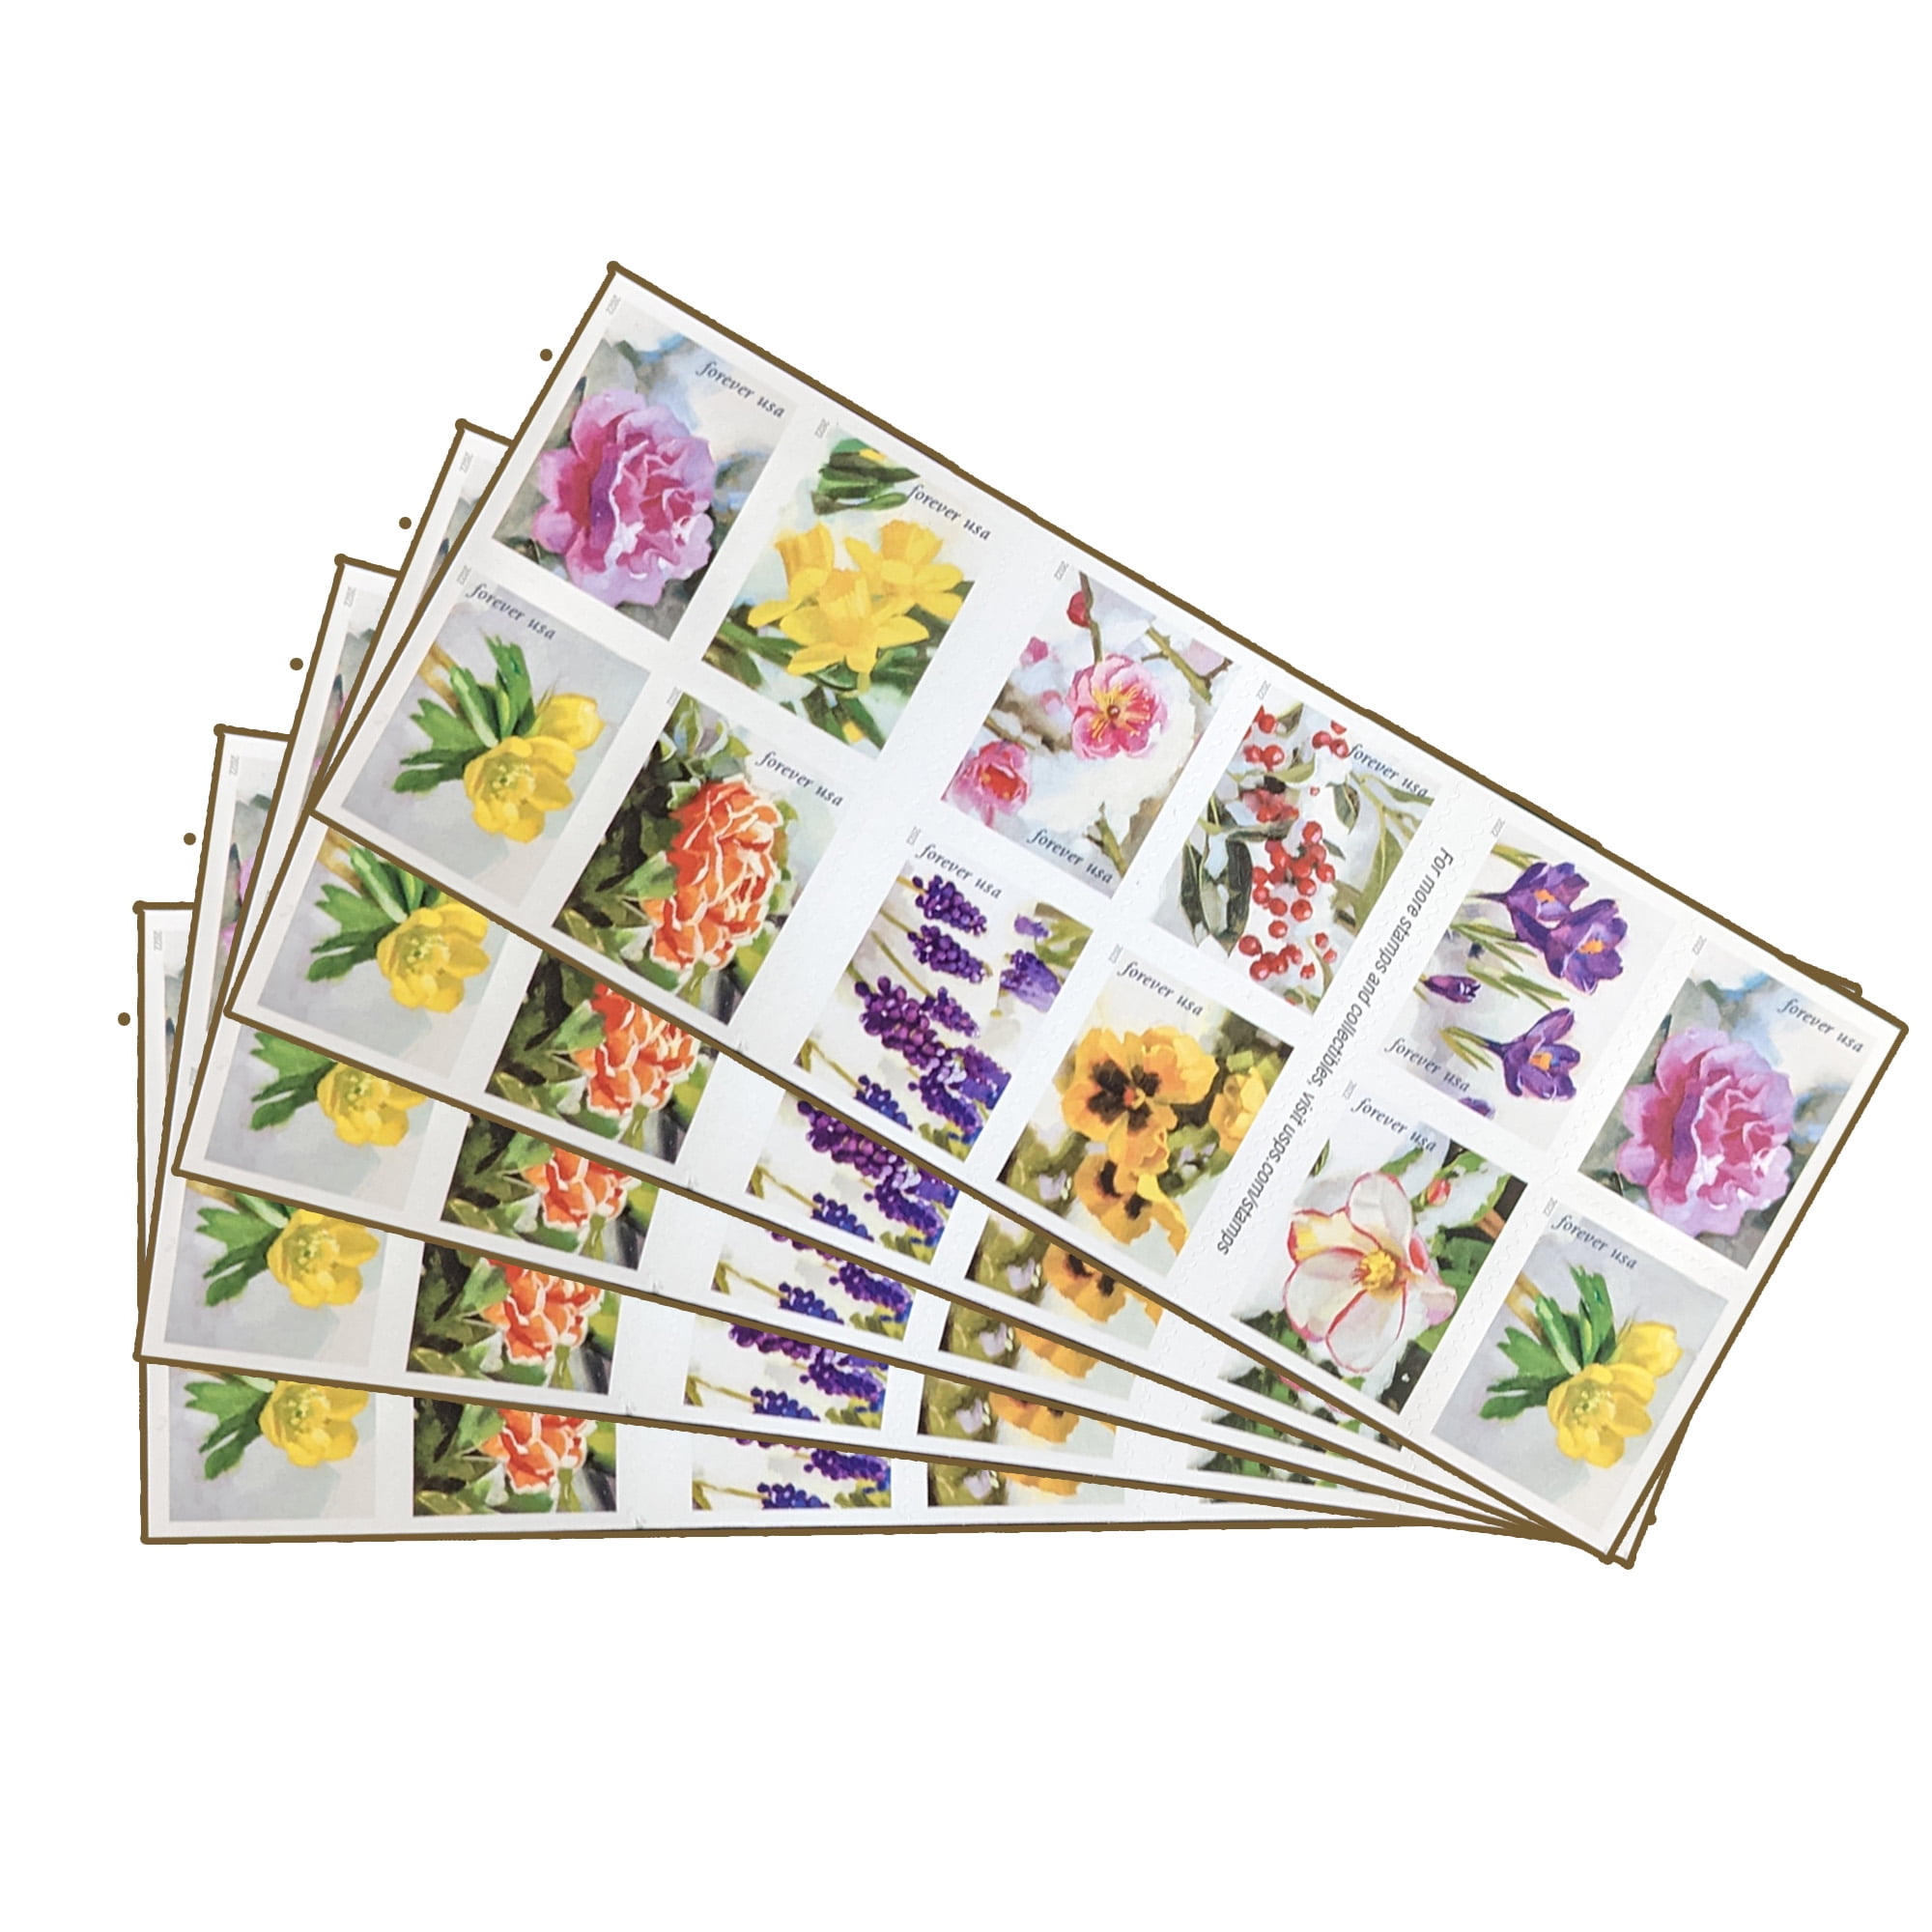 USPS Garden Beauty Forever Postage Stamps Book of 20 Self-Stick First Class Wedding Celebration Anniversary Flower Party (20 Stamps)